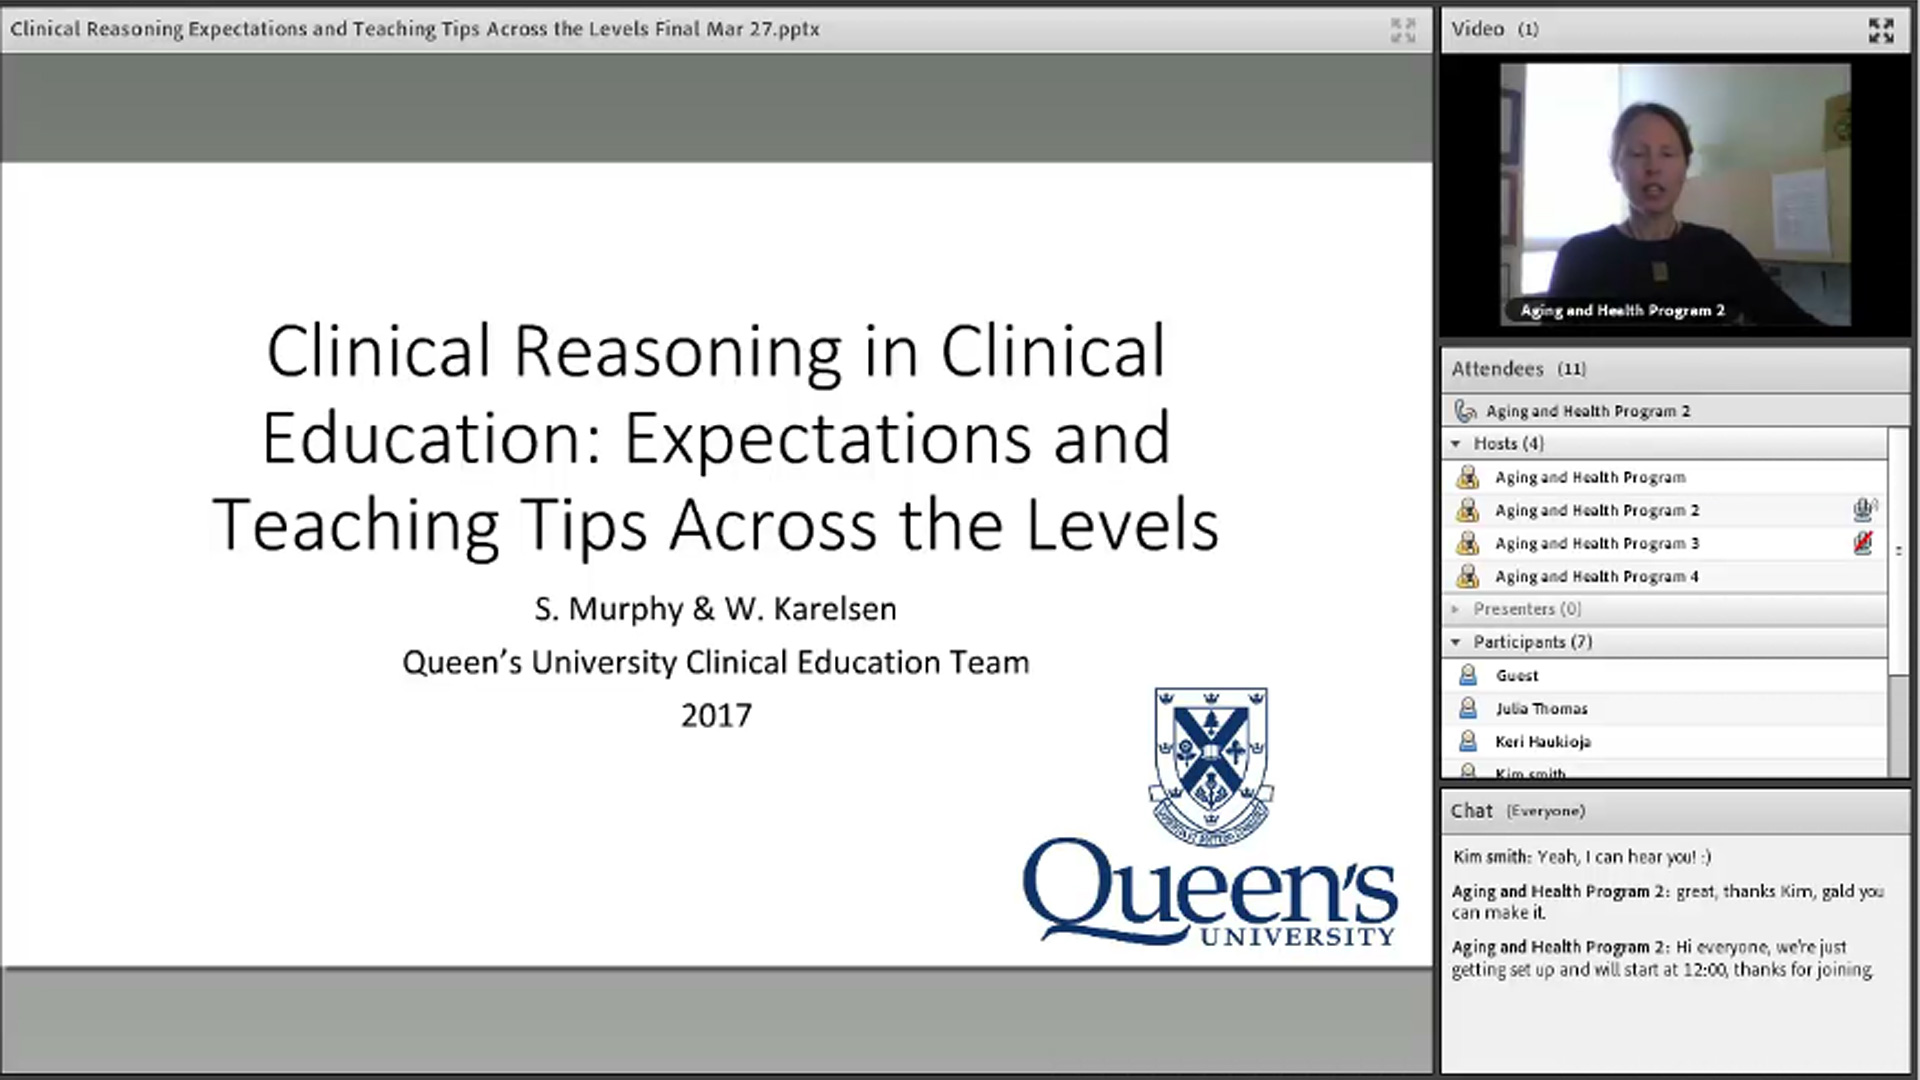 Clinical Reasoning in Clinical Education - not working